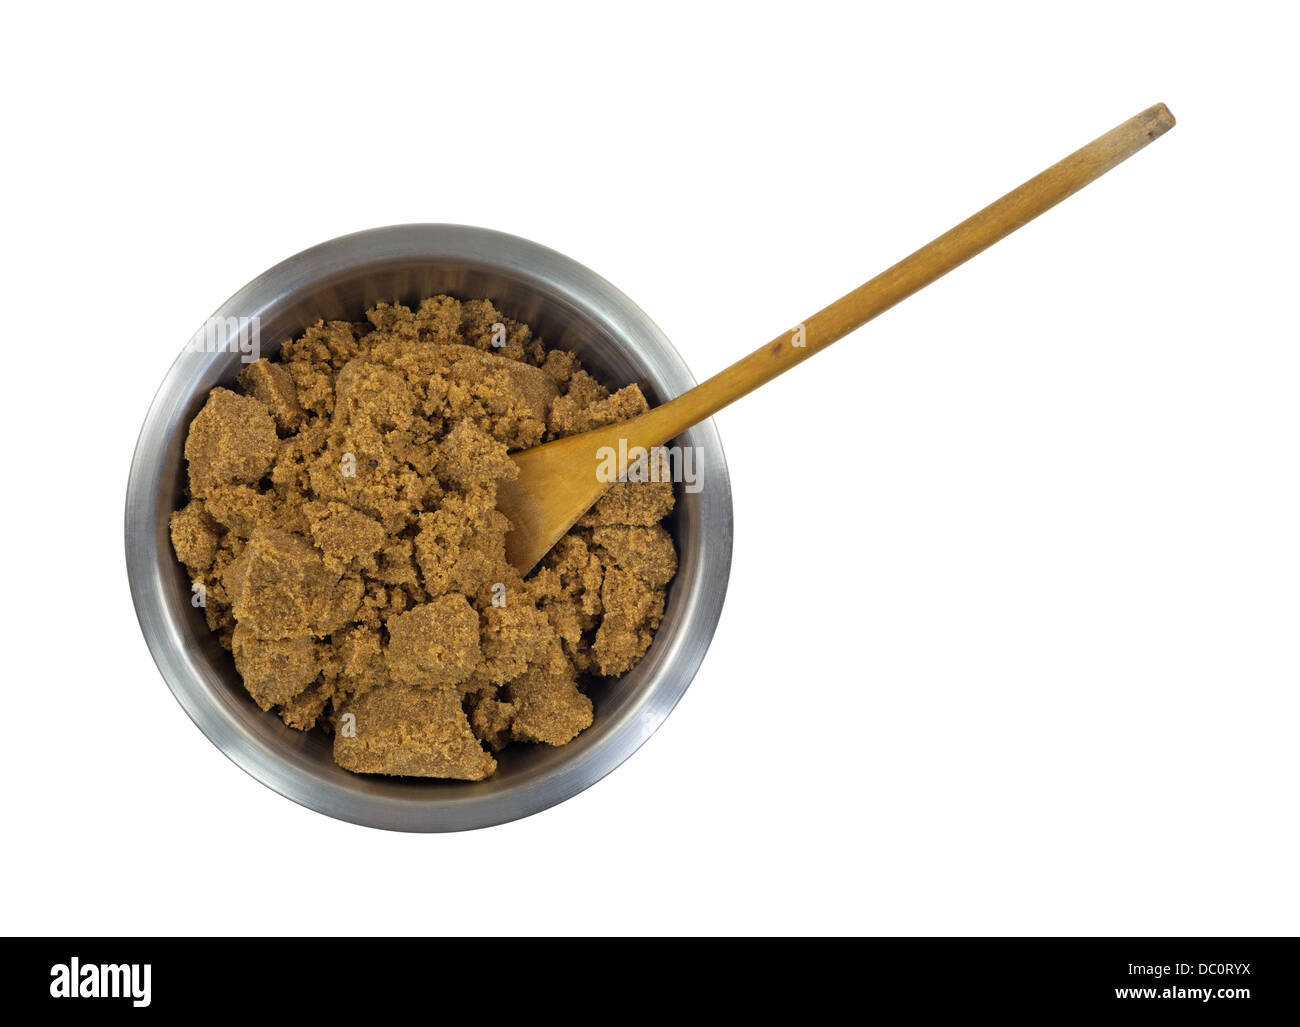 A stainless steel bowl filled with dark brown sugar and a worn wood spoon on a white background. Stock Photo